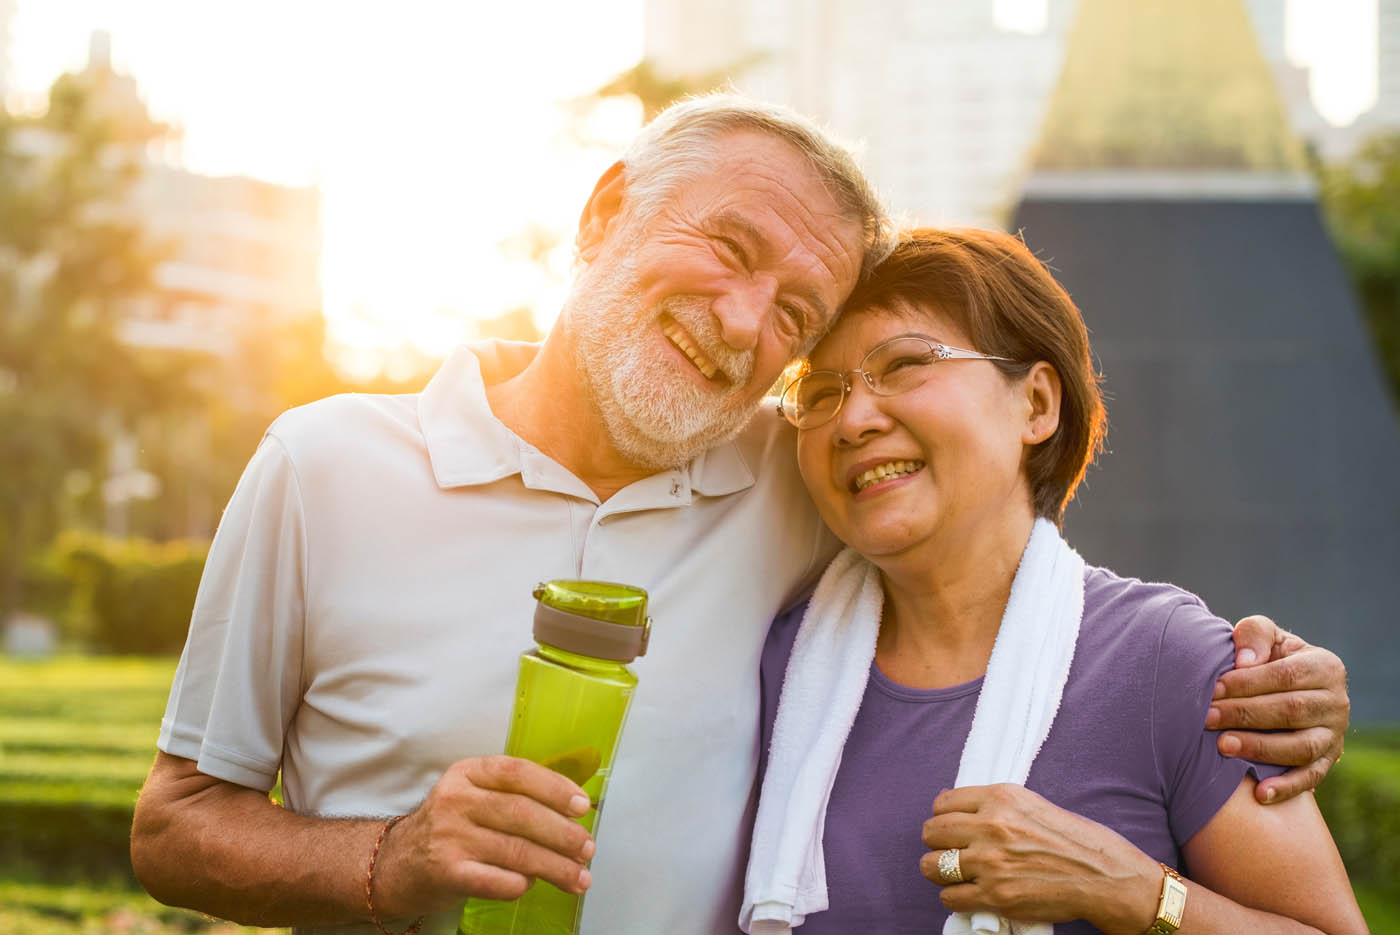 Two older people hugging and enjoying the sunlight - learn about photobiomodulation benefits.